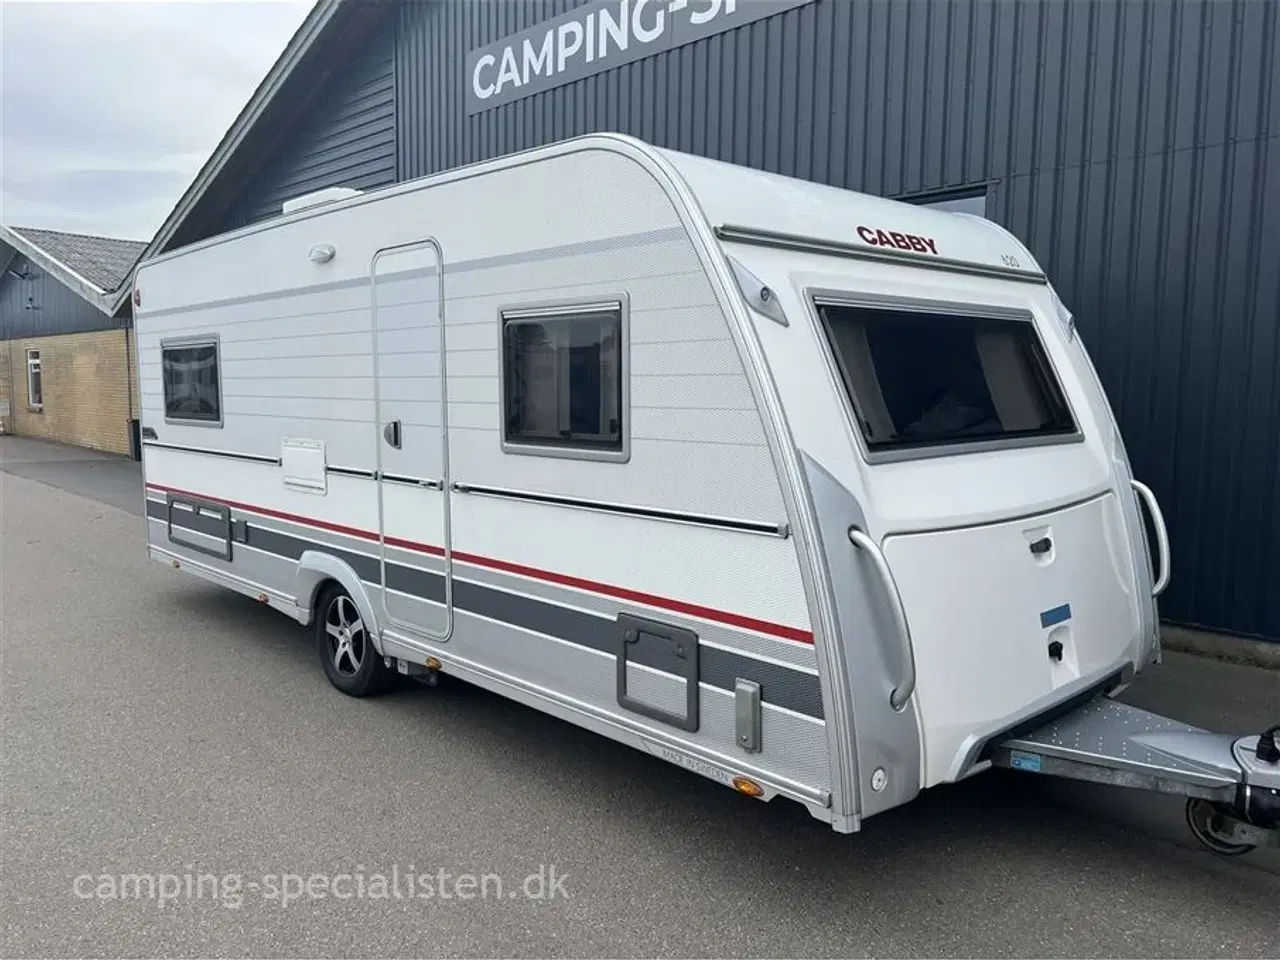 Billede 2 - 2014 - Cabby Caienna 620 F3   2014 Cabby Caienna 620 F3 - se den nu hos Camping-Specialisten i Aarhus.